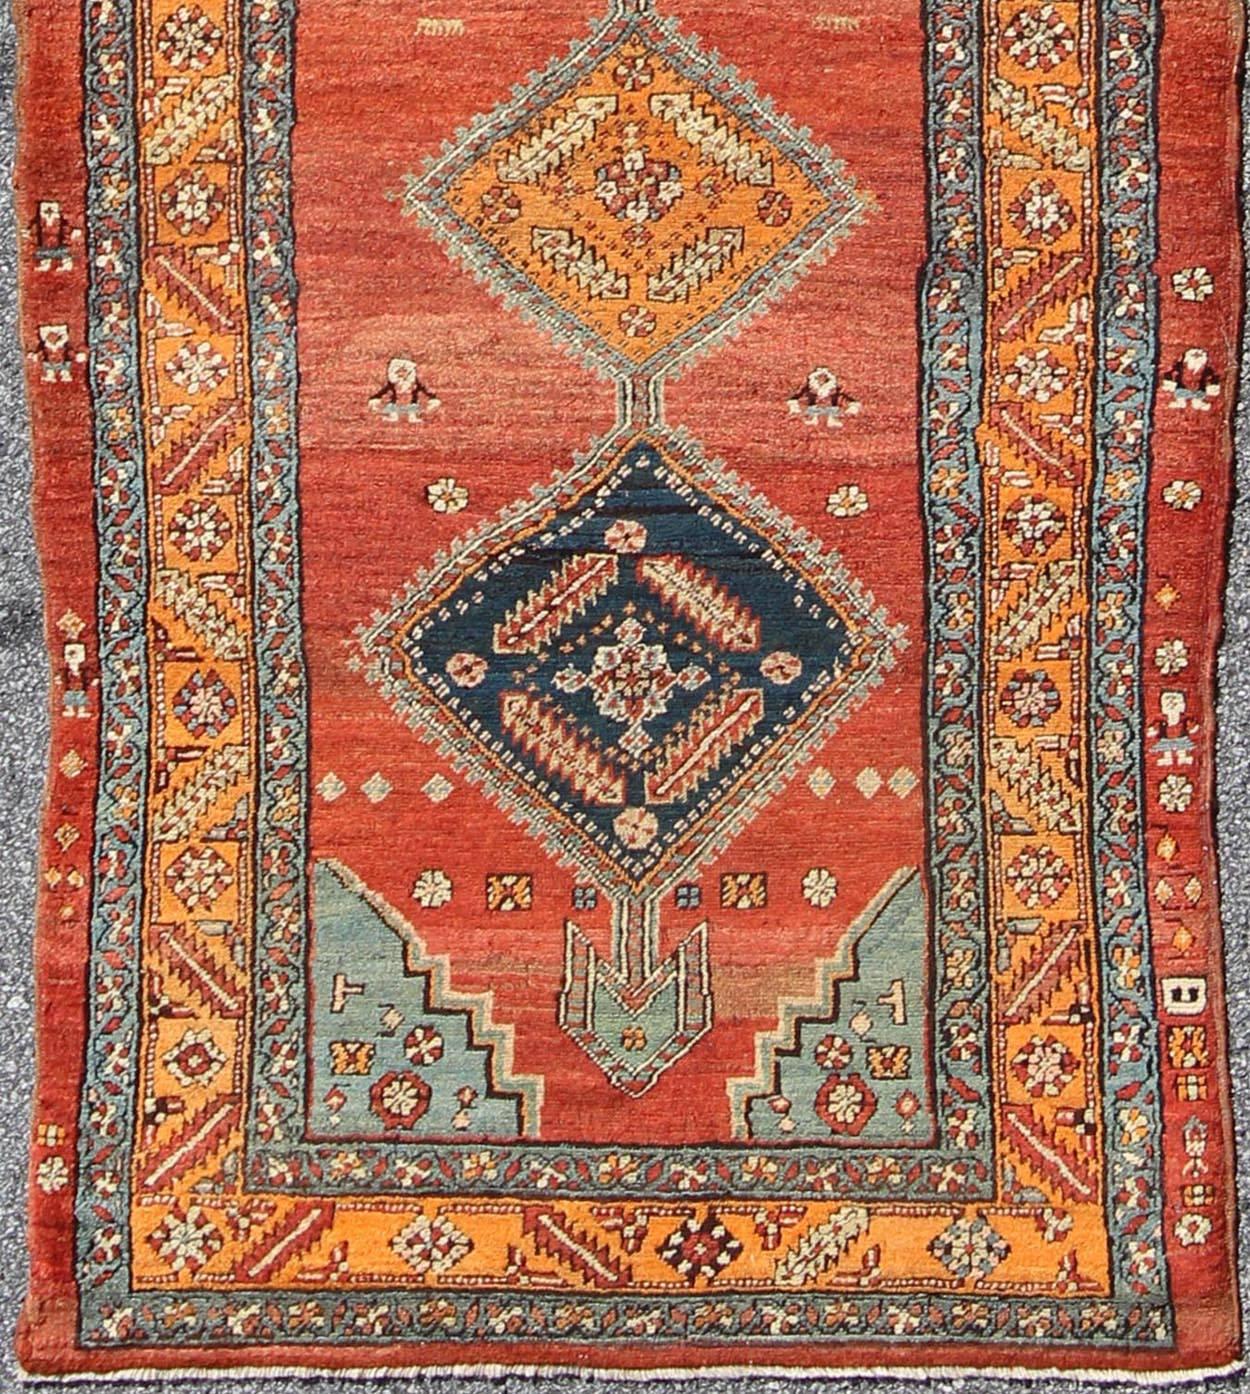 Late 19th century antique Persian Bakshaish rug with tribal medallions in red, l11-1107, country of origin / type: Iran / Bakshaish, circa 1890

Crafted in the Azarbijan district of northwest Persia, this superb antique rug (circa 1890) represents